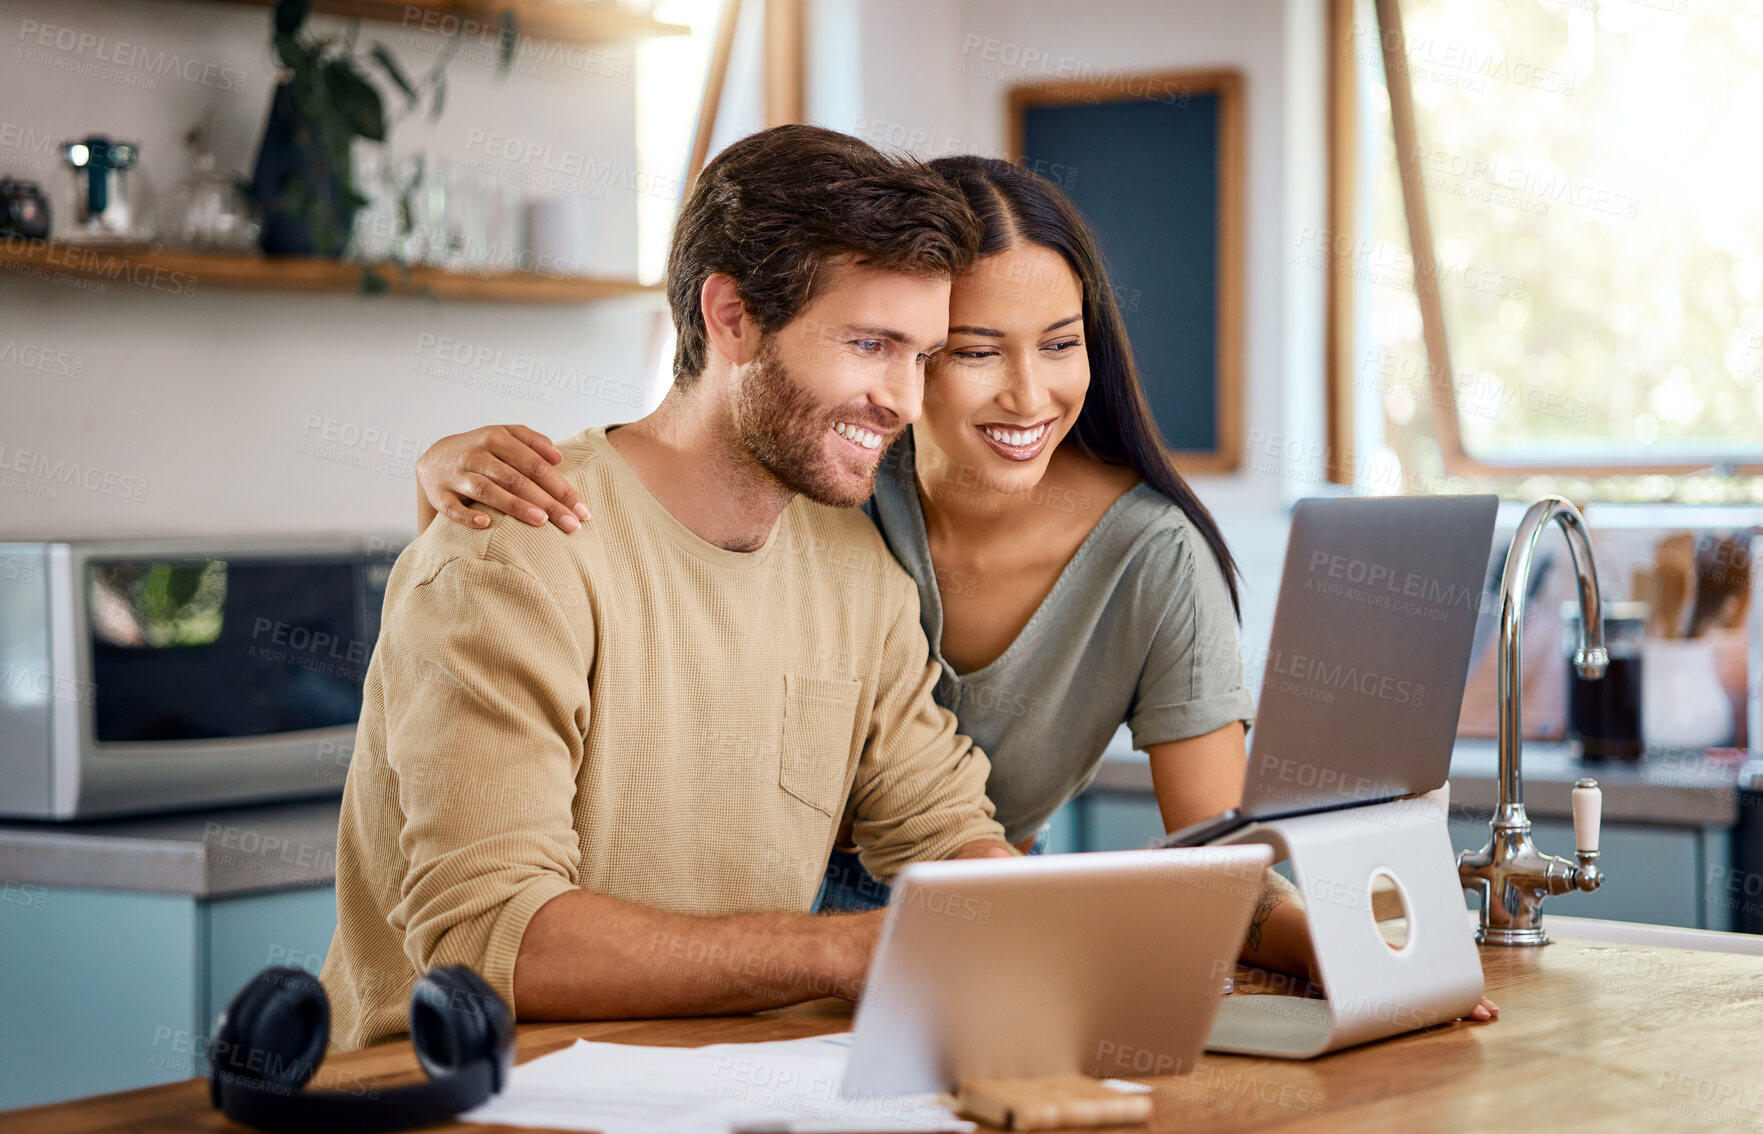 Buy stock photo Beautiful young hispanic wife standing behind her caucasian husband working on his laptop while they look at the screen together and smile. Happy young interracial couple surfing the internet, looking at home finances and enjoying work from home